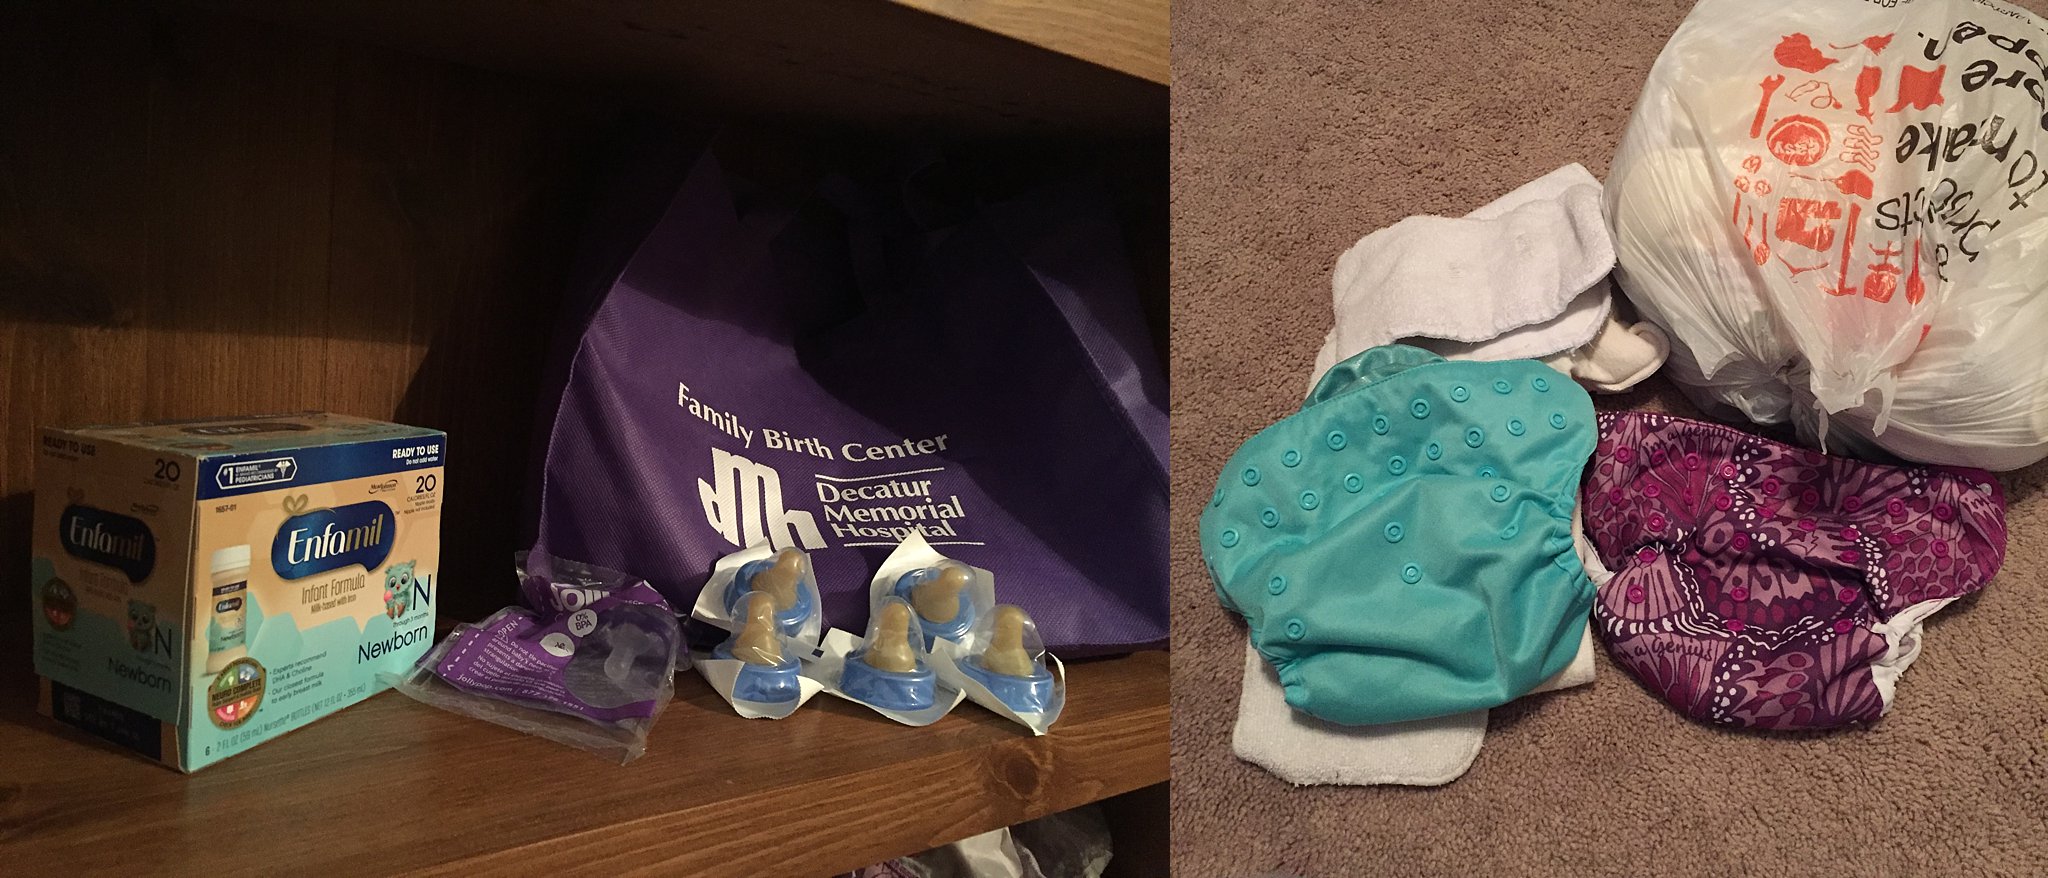 Cloth Diapers and Hospital Bag